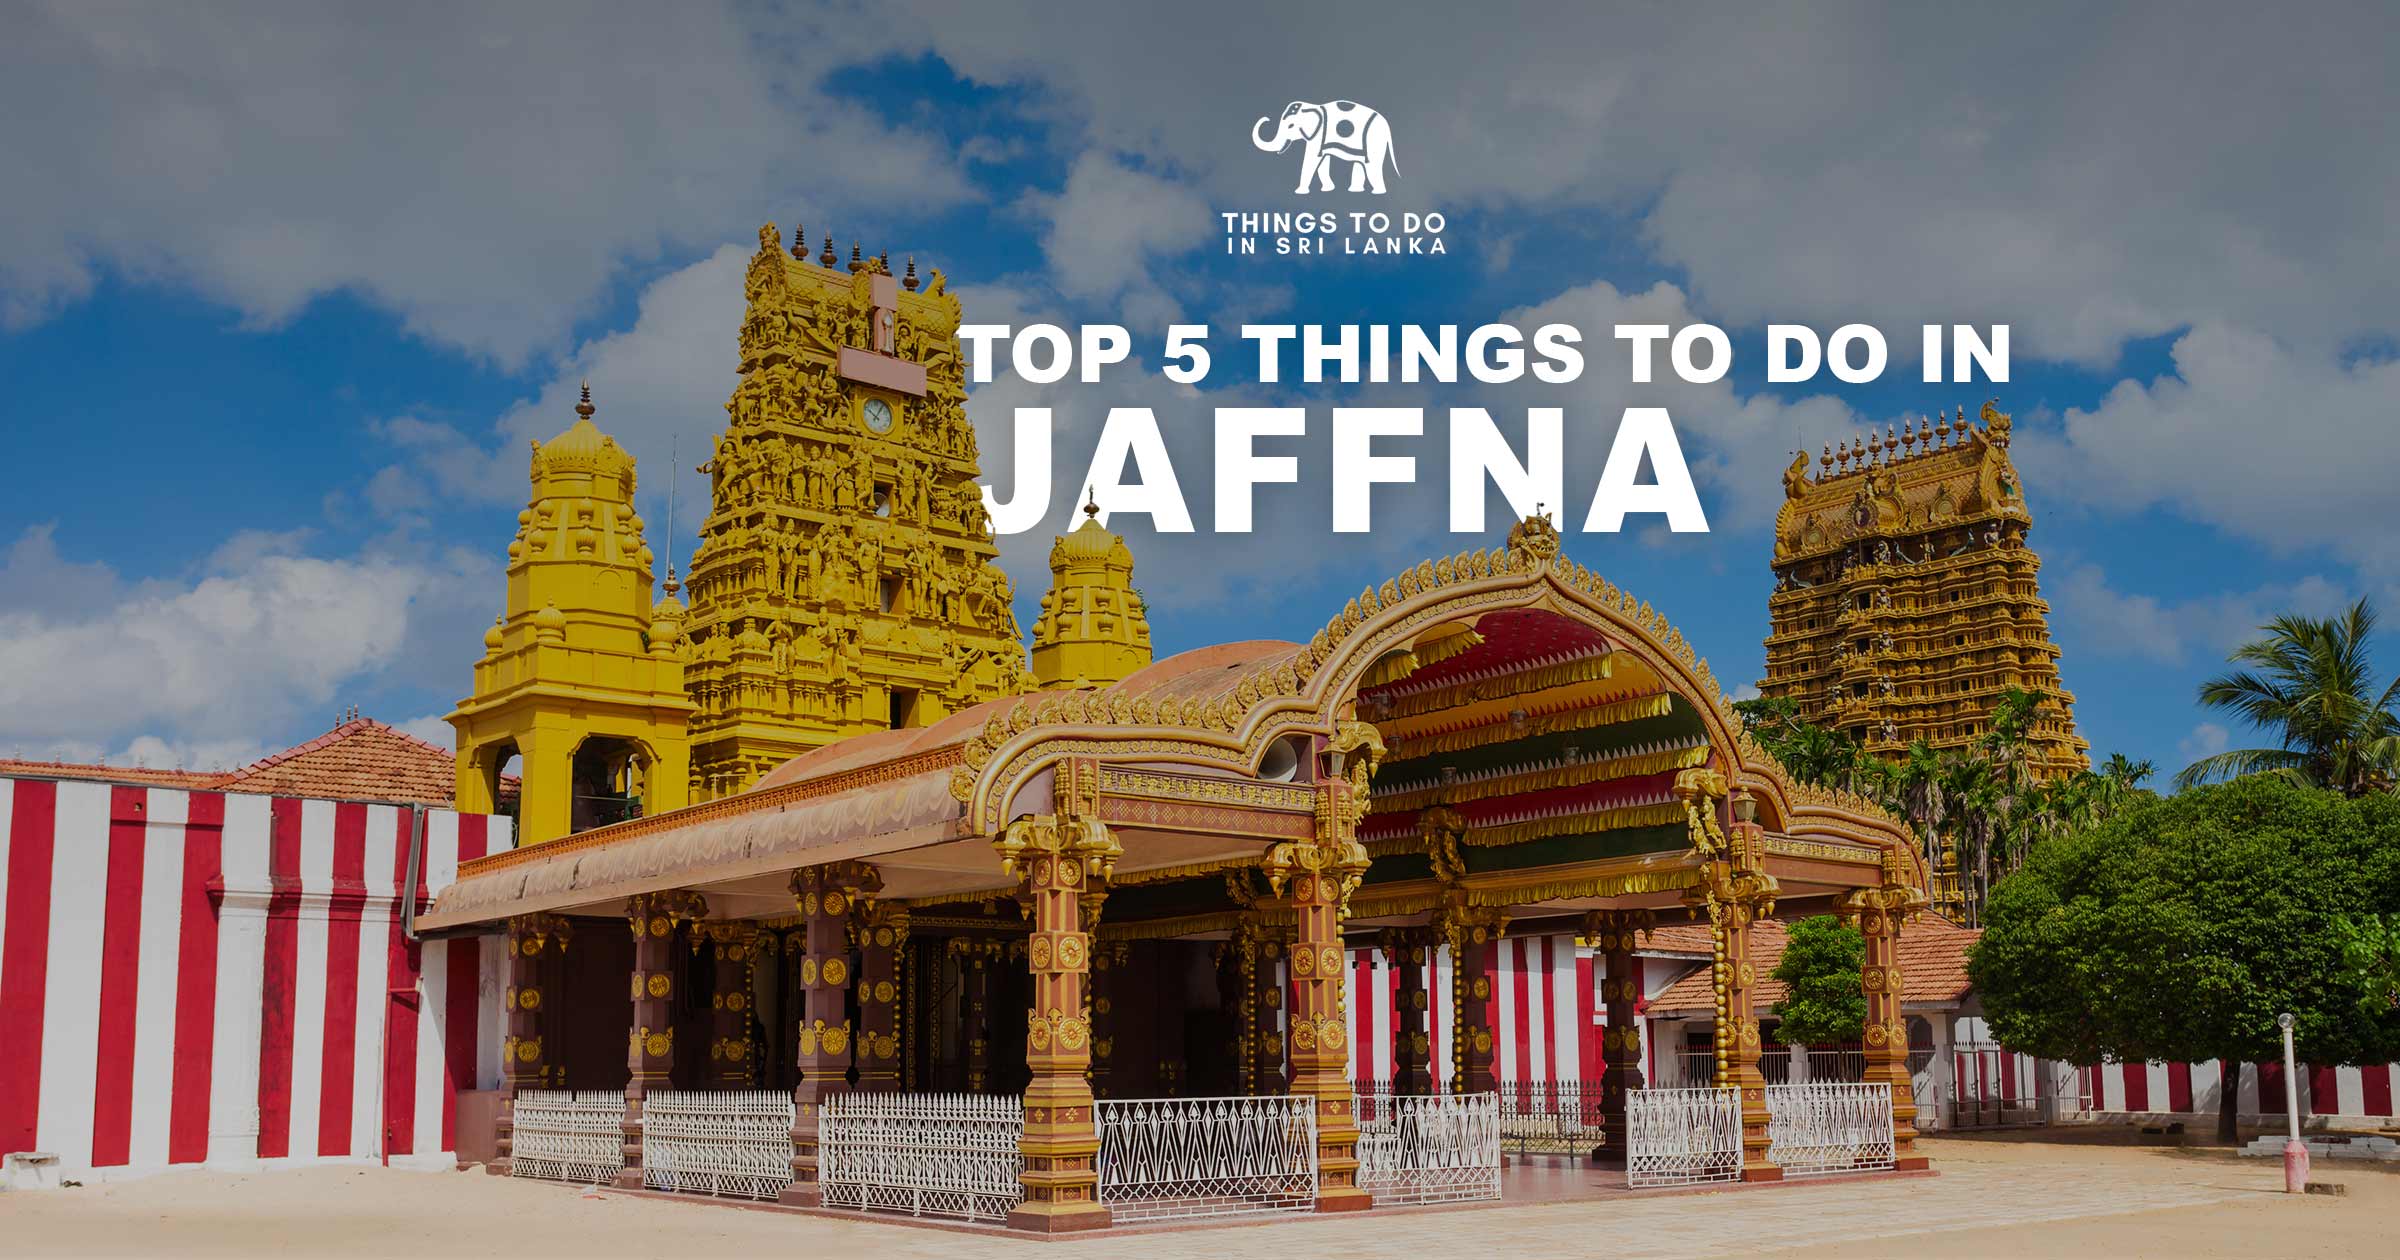 Top 5 things to do in Jaffna